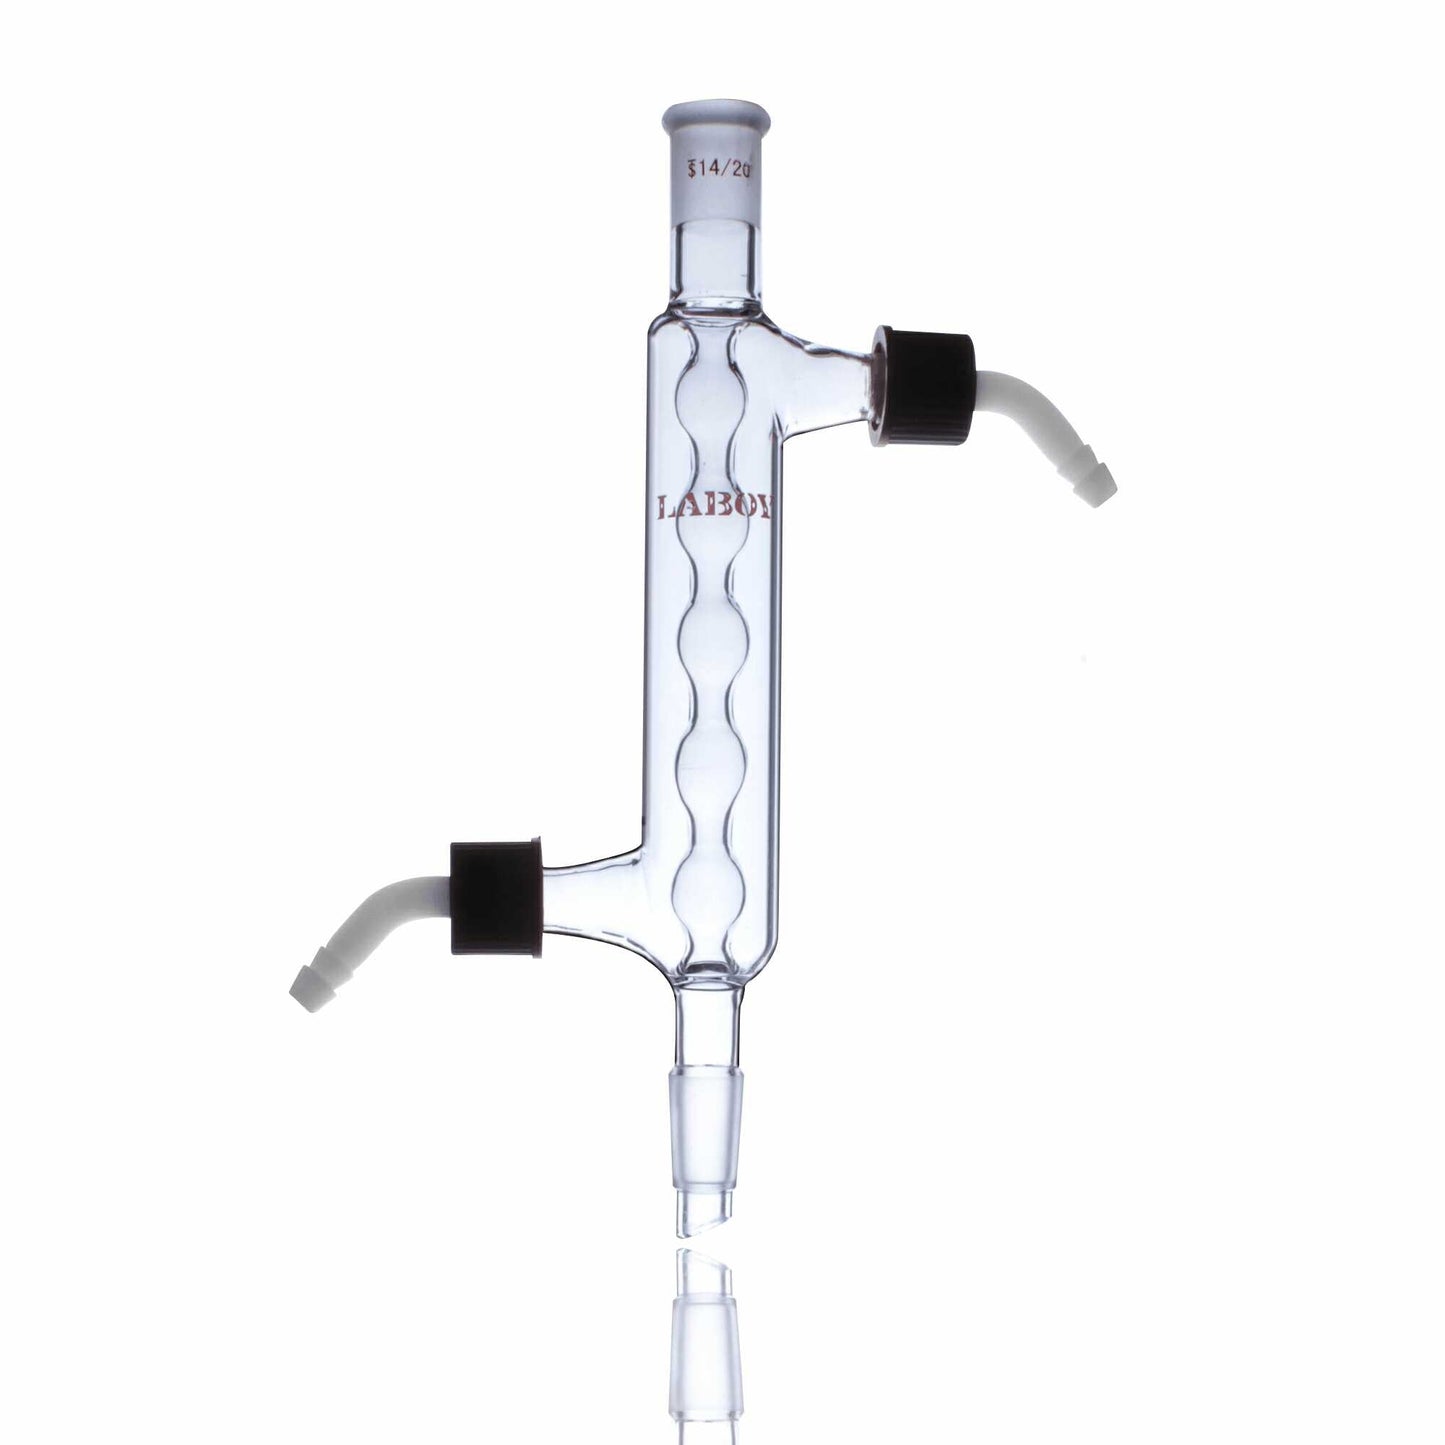 Allihn Condenser with Standard Taper Joints with Removable Hose Connections - Scienmart